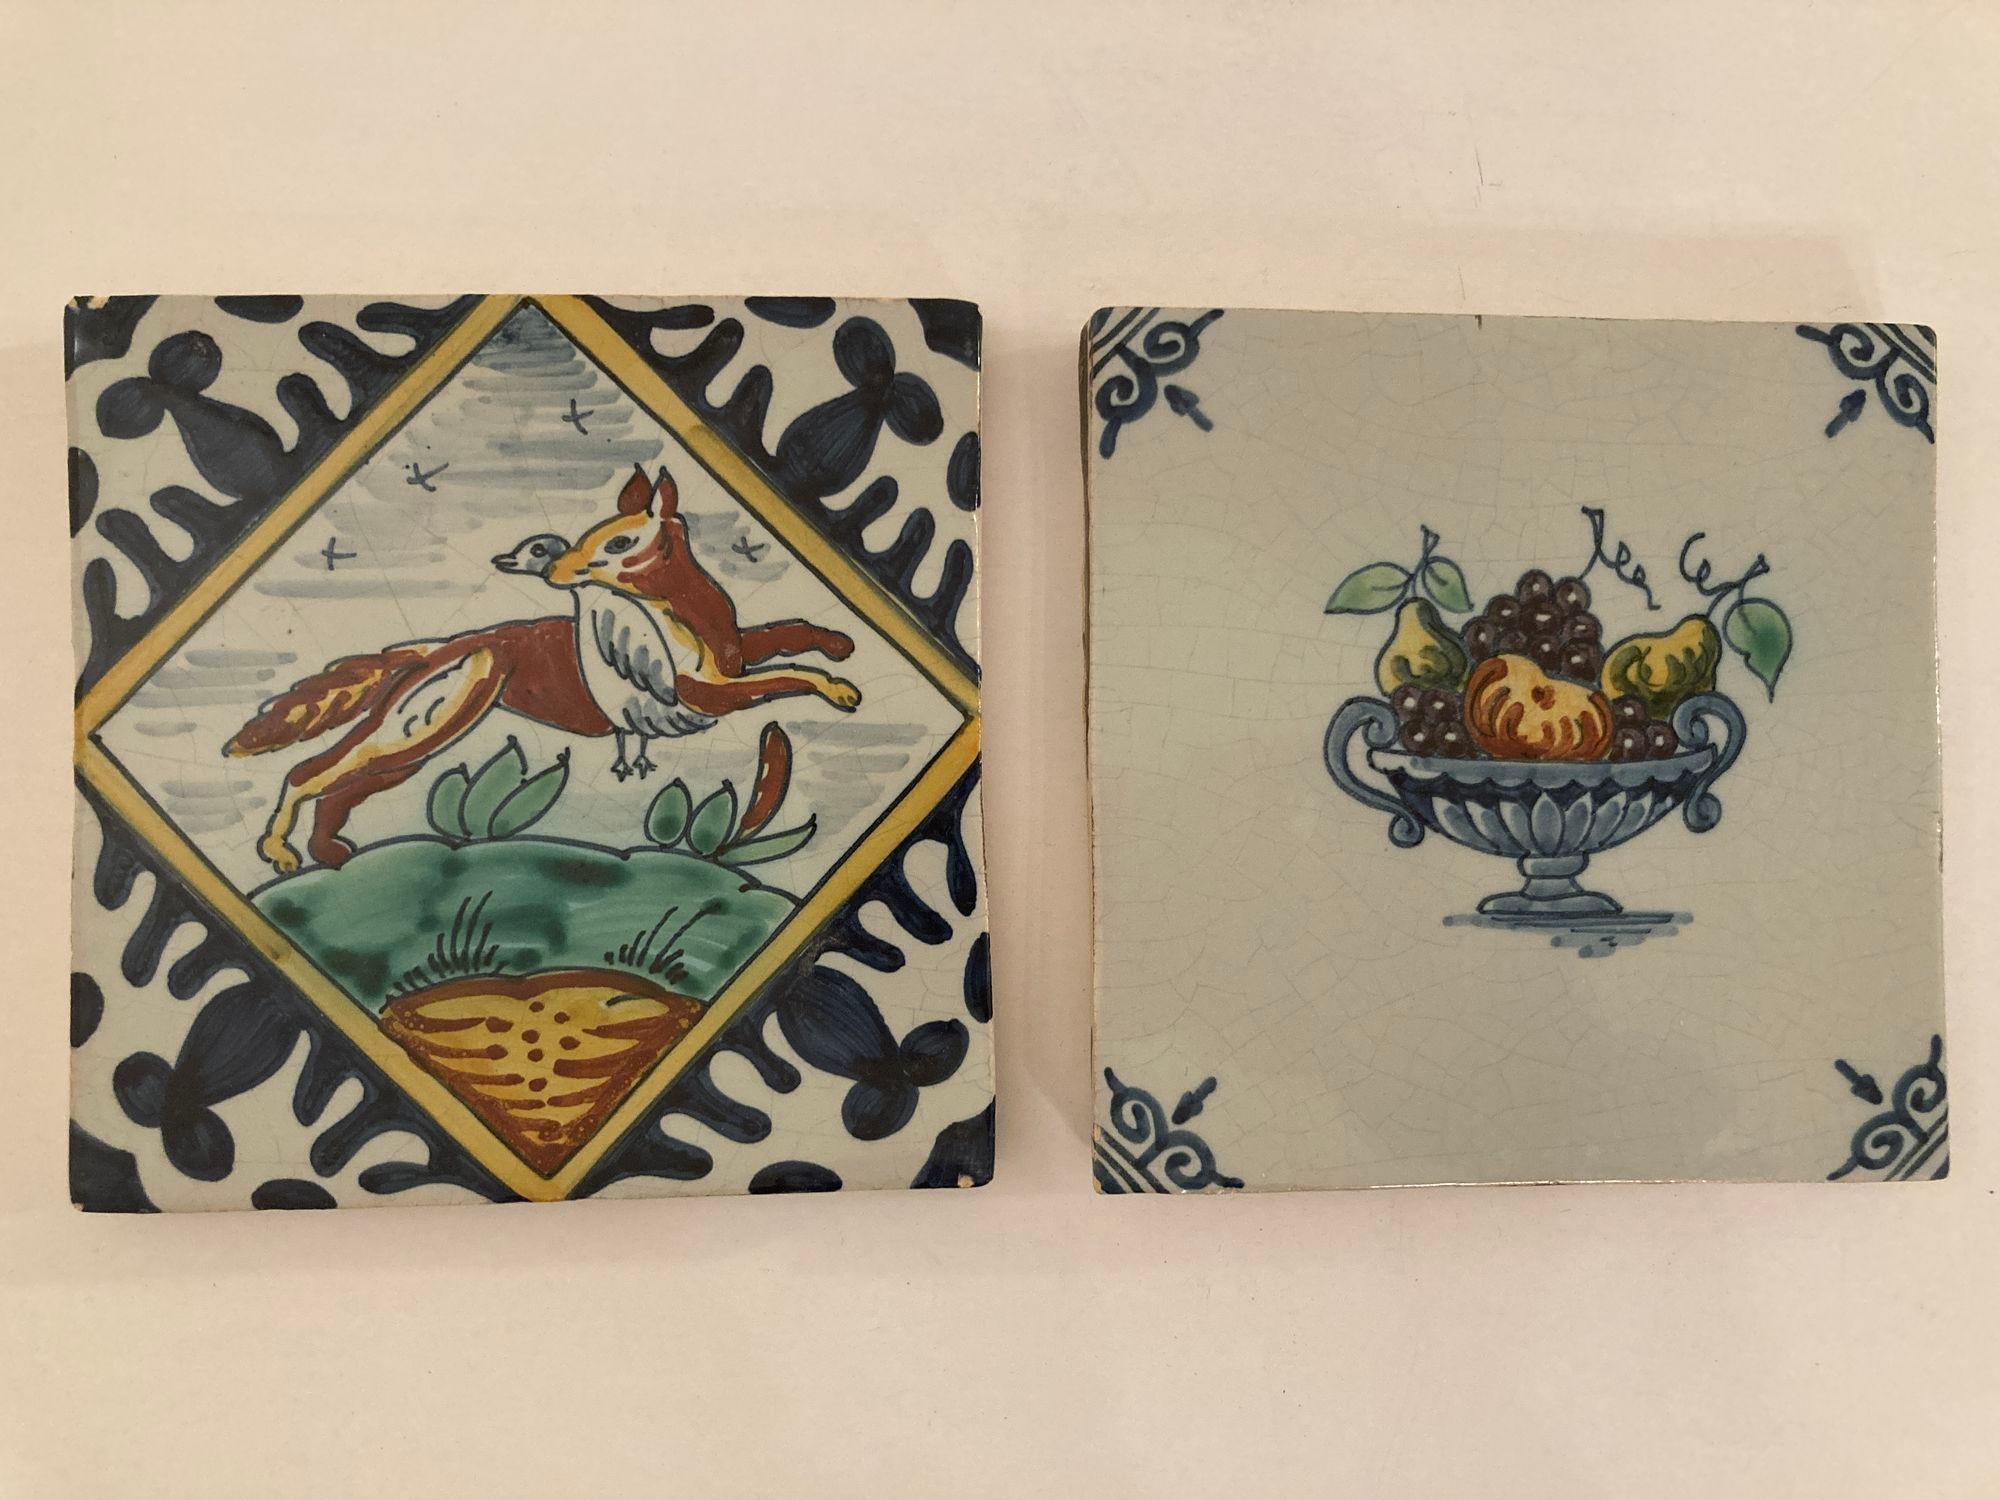 Antique Dutch Delft polychrome tiles - set of 2.
These are two attractive Dutch (Netherlands), Delft ceramic wall tiles, which we date to the late 19th century, circa 1870.
Hand-made by the Royal Tickelaar of Makkum, the oldest pottery and tile